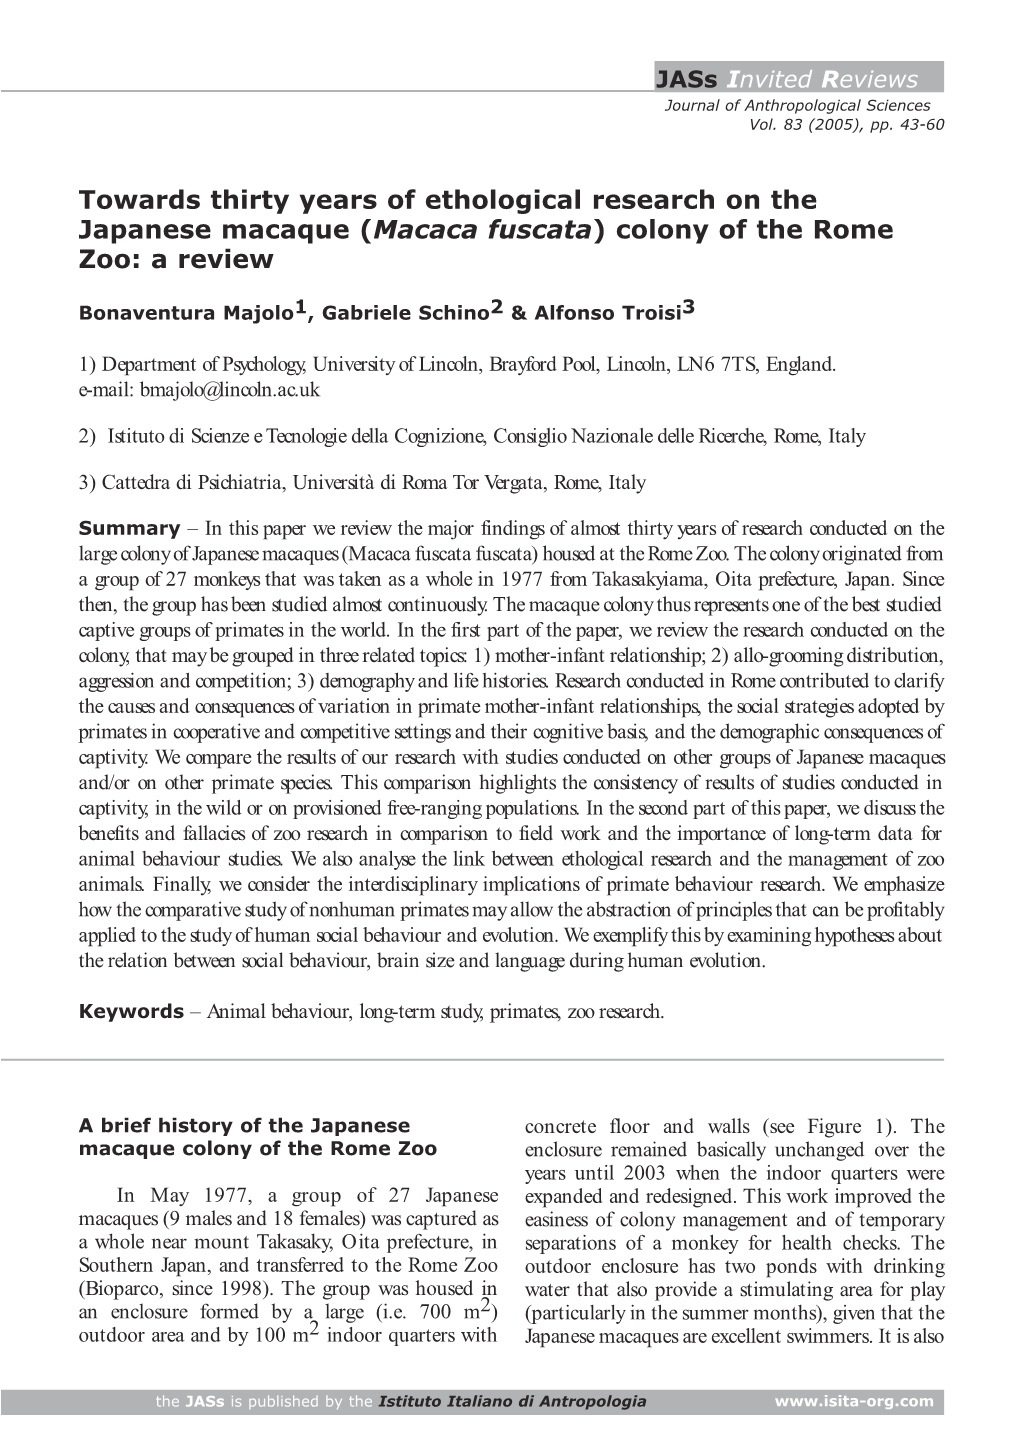 Macaca Fuscata) Colony of the Rome Zoo: a Review